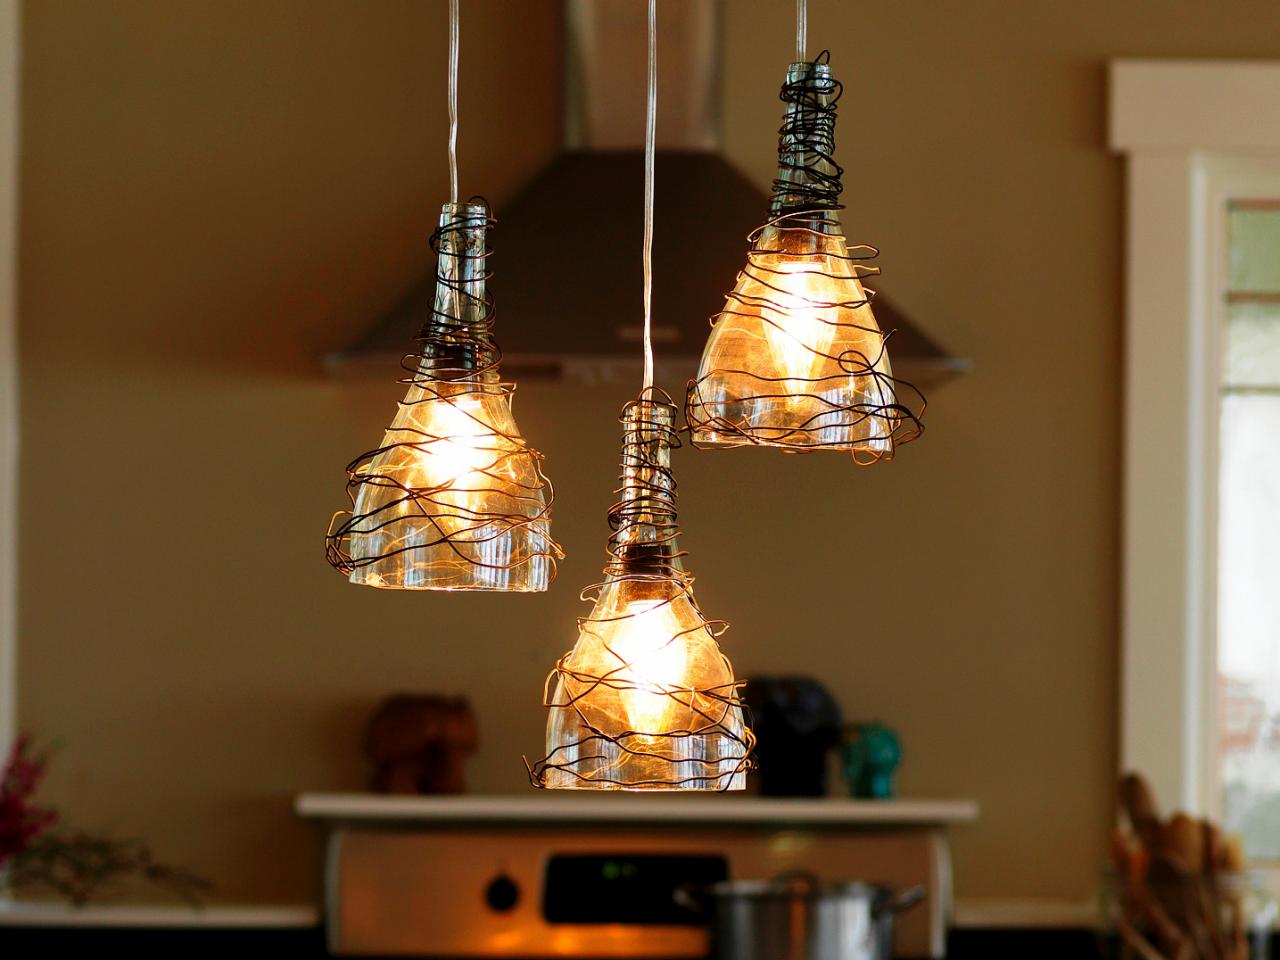 Upcycle Wine Bottle Into Pendant Light, How To Make A Pendant Light Fixture